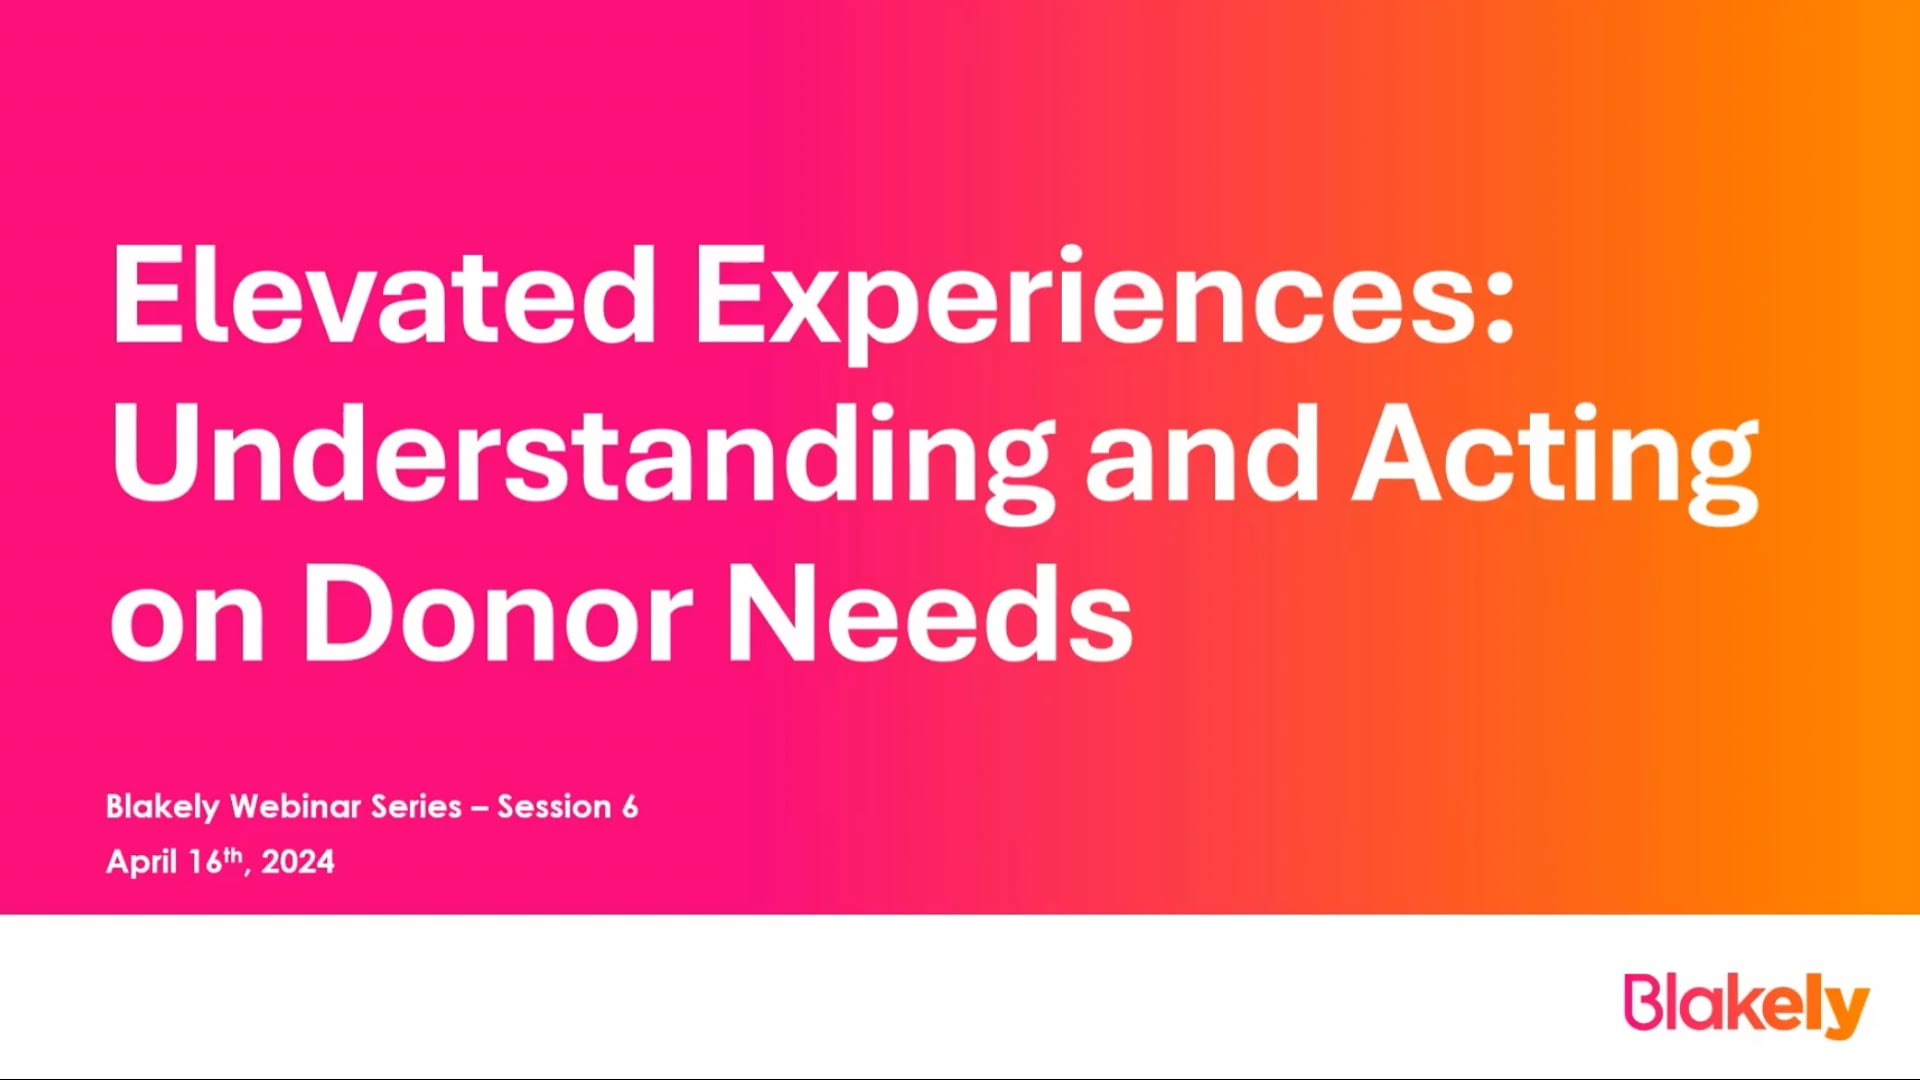 Elevated Experiences: Understanding and Acting on Donor Needs